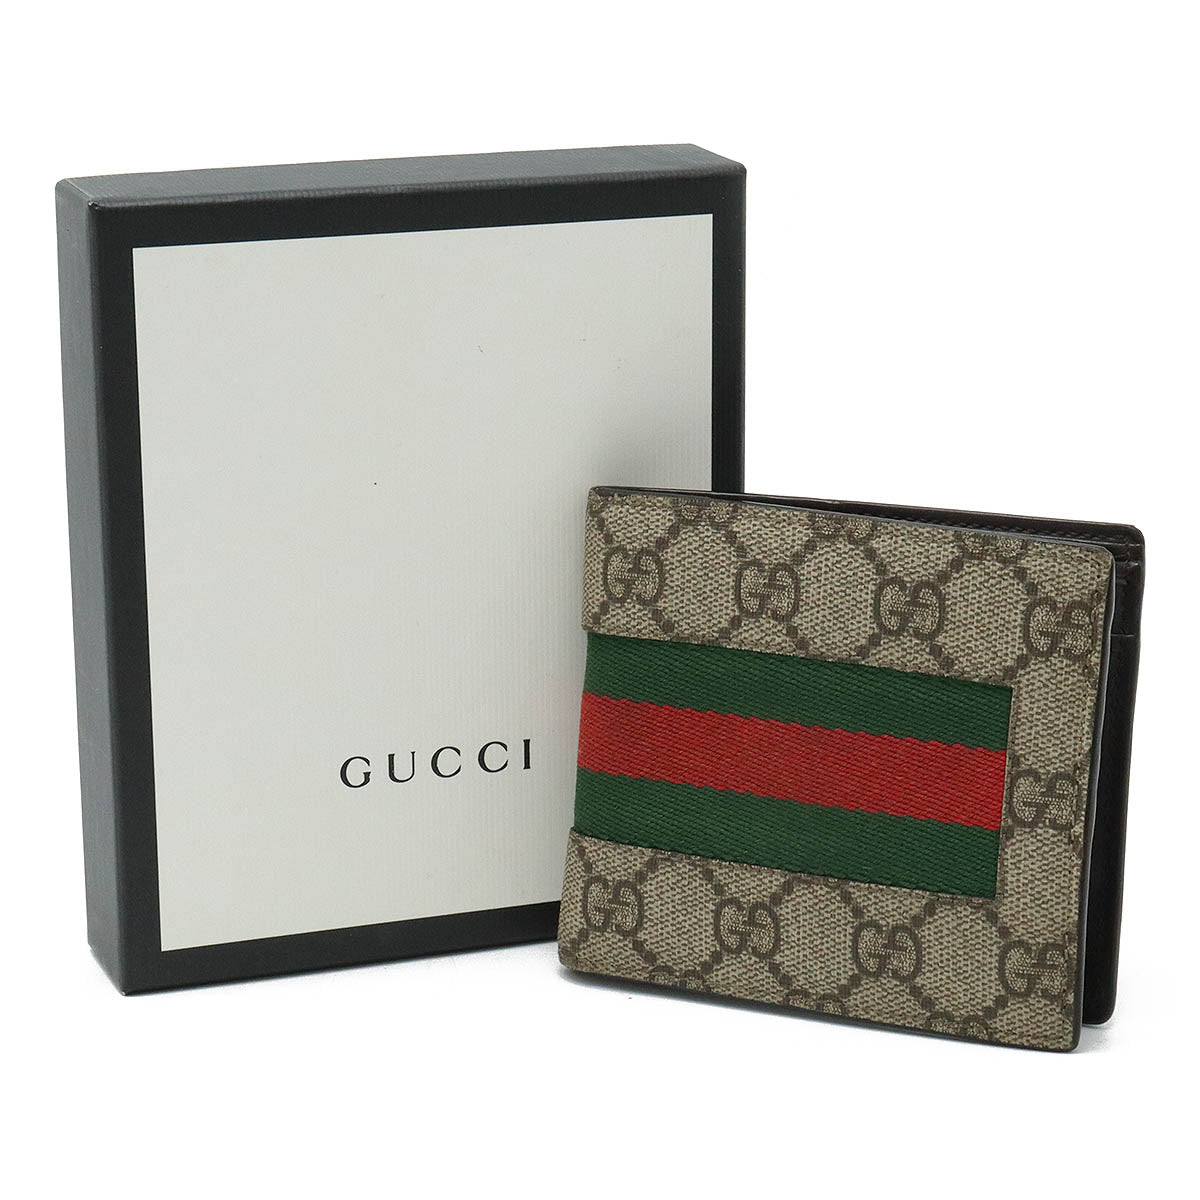 GUCCI Gucci GG Spring New Web Shellie Two Folded Wallet Two Folded Wallet PVC Beige Green Green Red Red 408826  Egg Blumen/Mosaic Quality